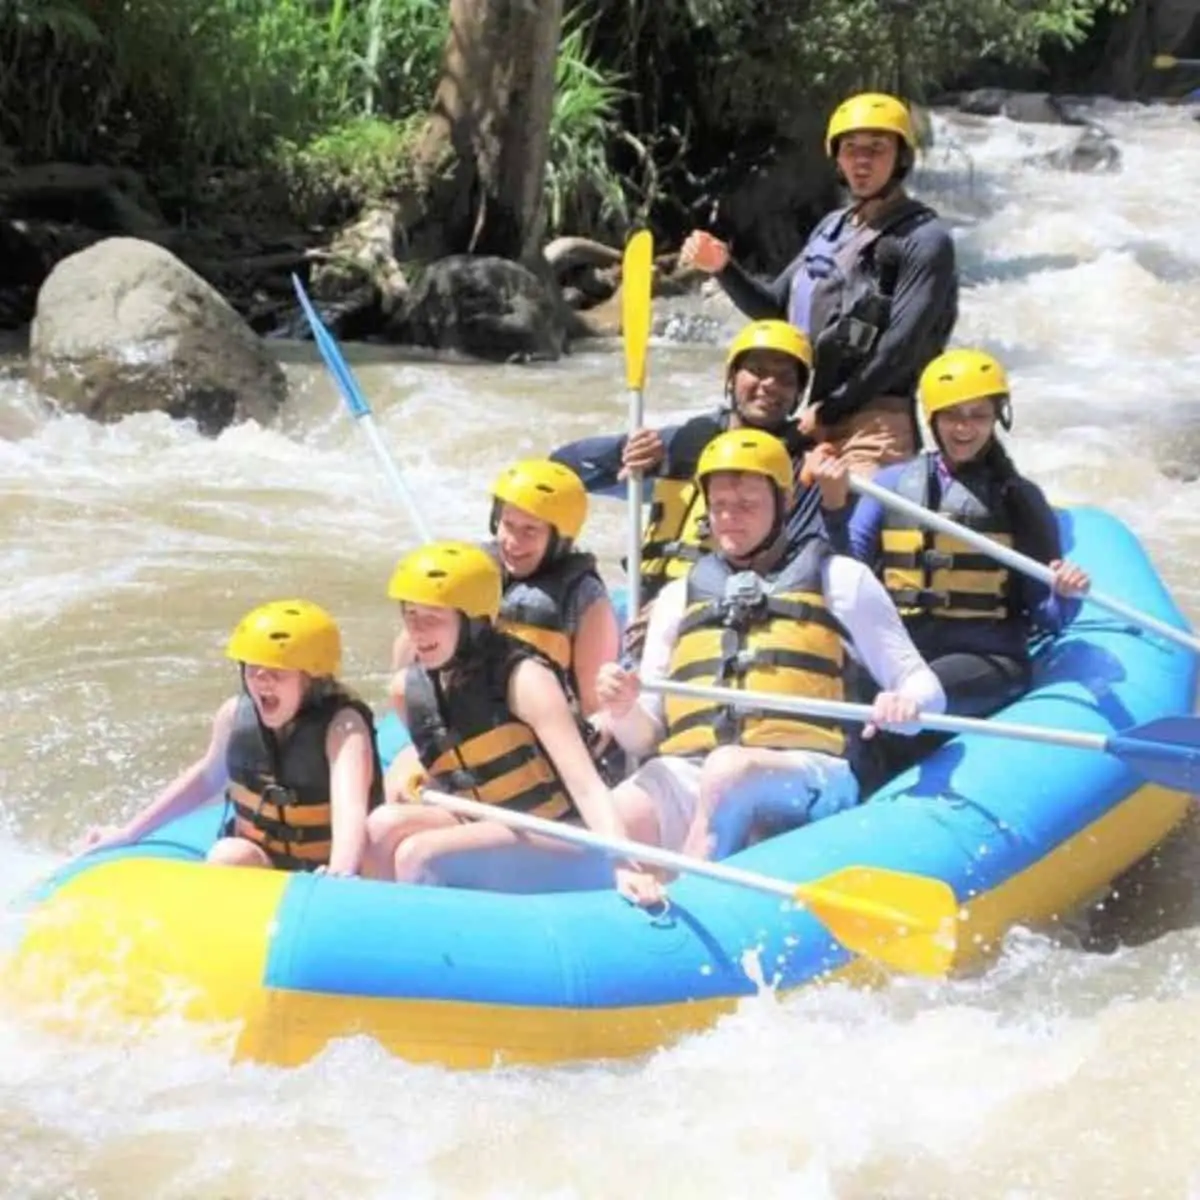 A group of people enjoying the white water rafting sport